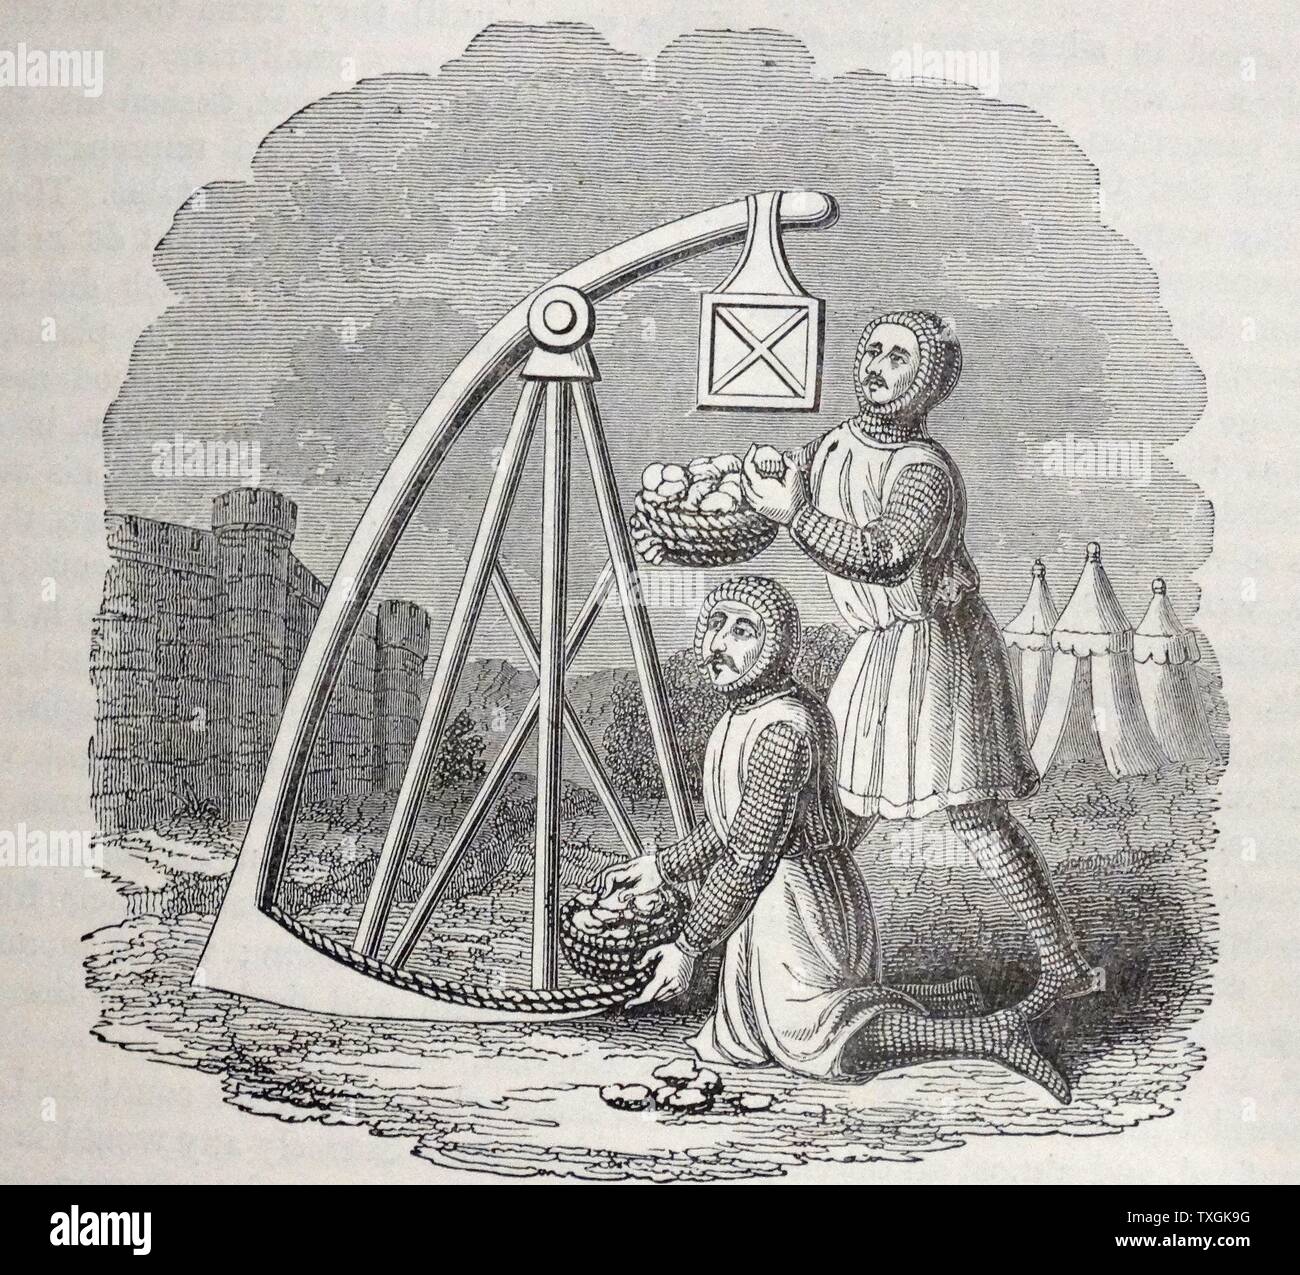 Engraving of a Trebuchet, a machine used for casting stones. Dated 14th Century Stock Photo